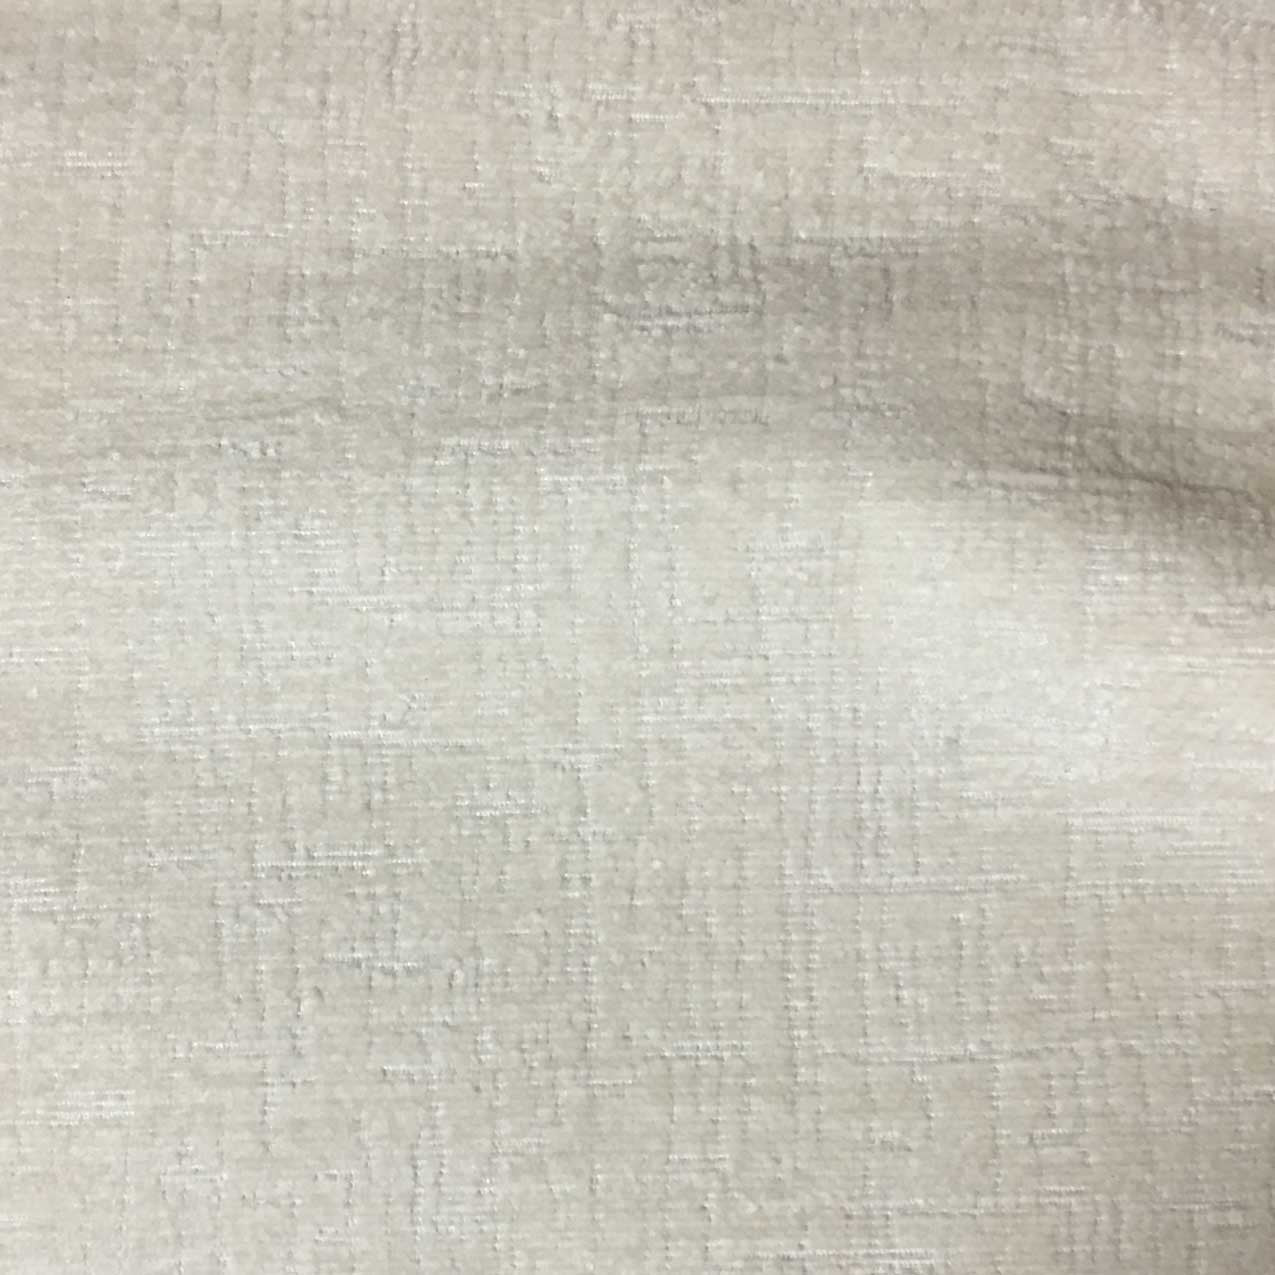 DERBY - CARDINAL, SOFT AND SHINY CHENILLE UPHOLSTERY FABRIC BY THE YARD